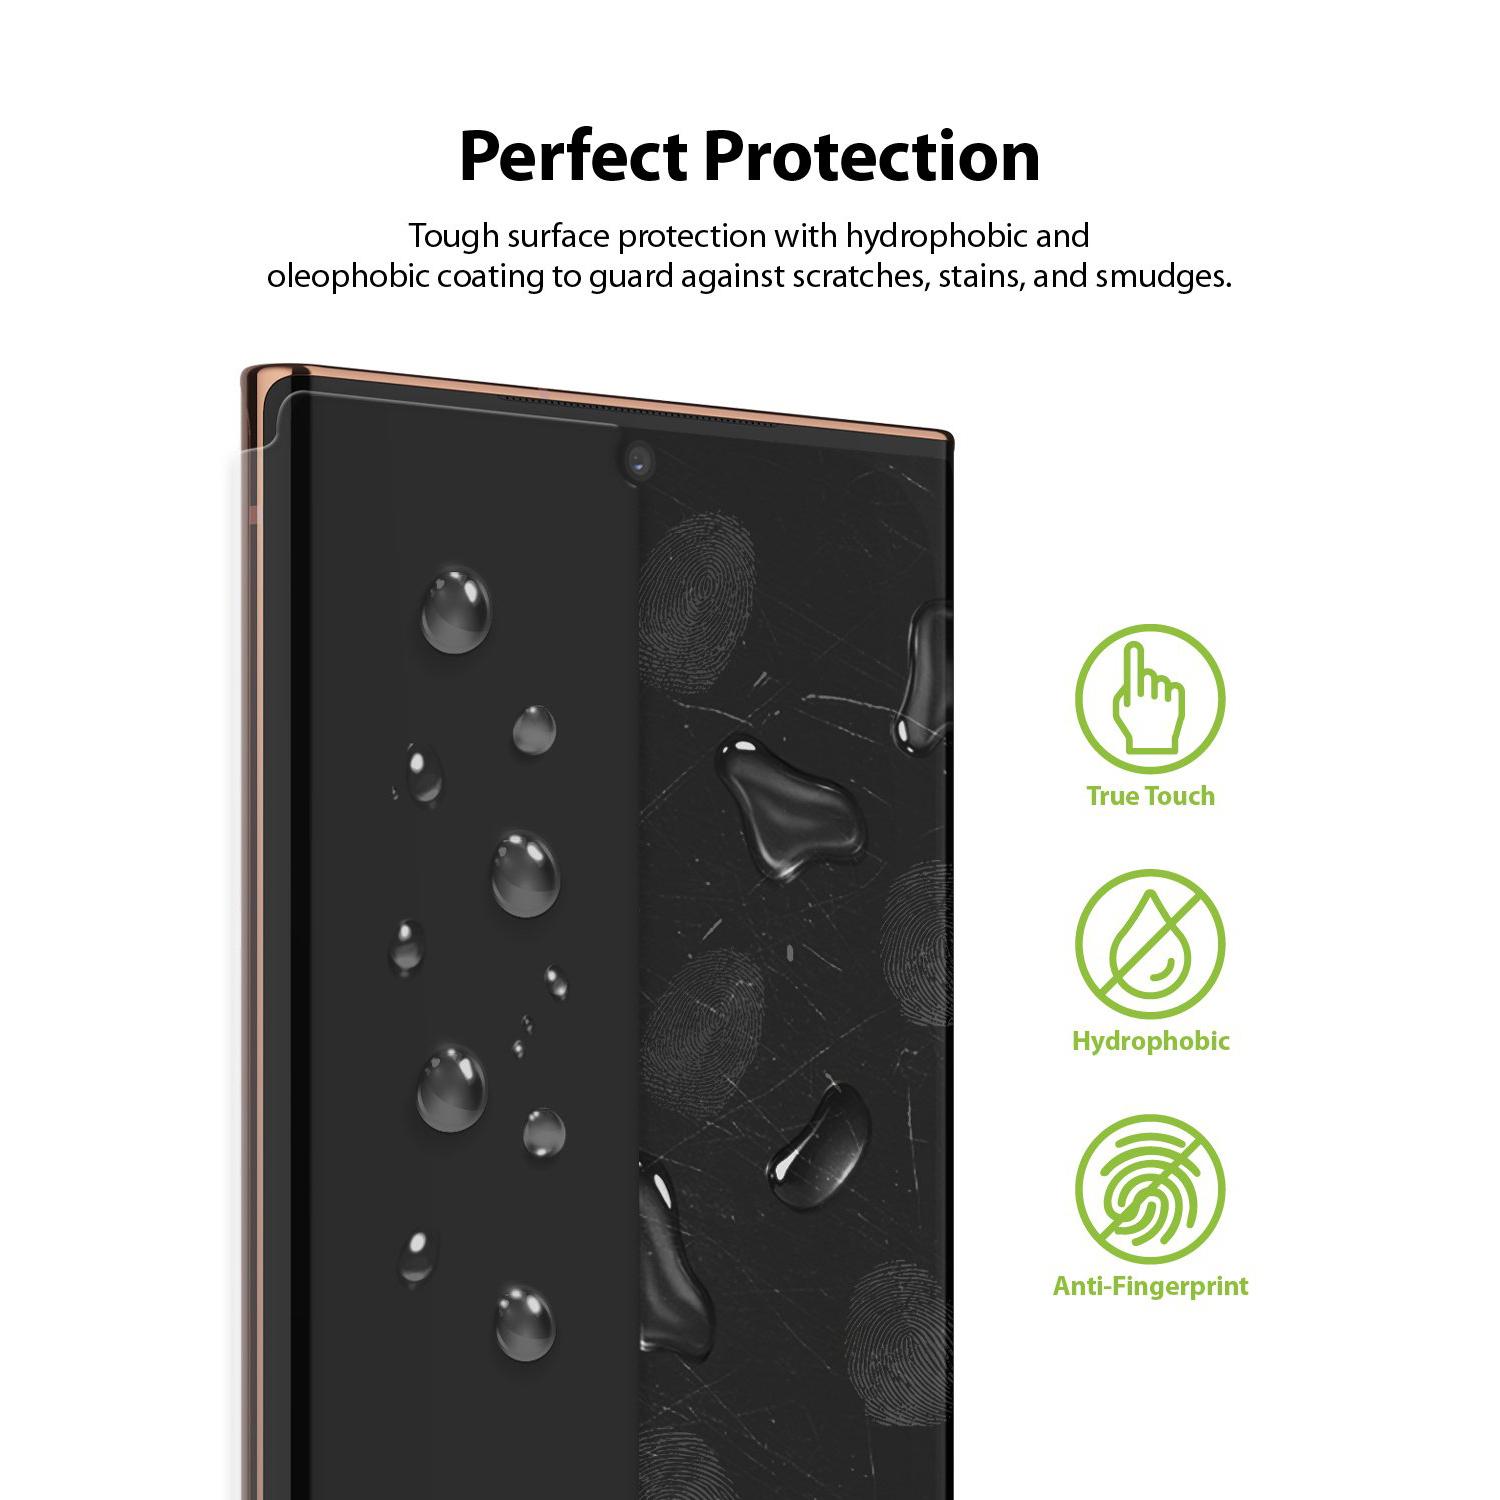 Dual Easy Wing Screen Protector Galaxy Note 20 Ultra (2-pack)